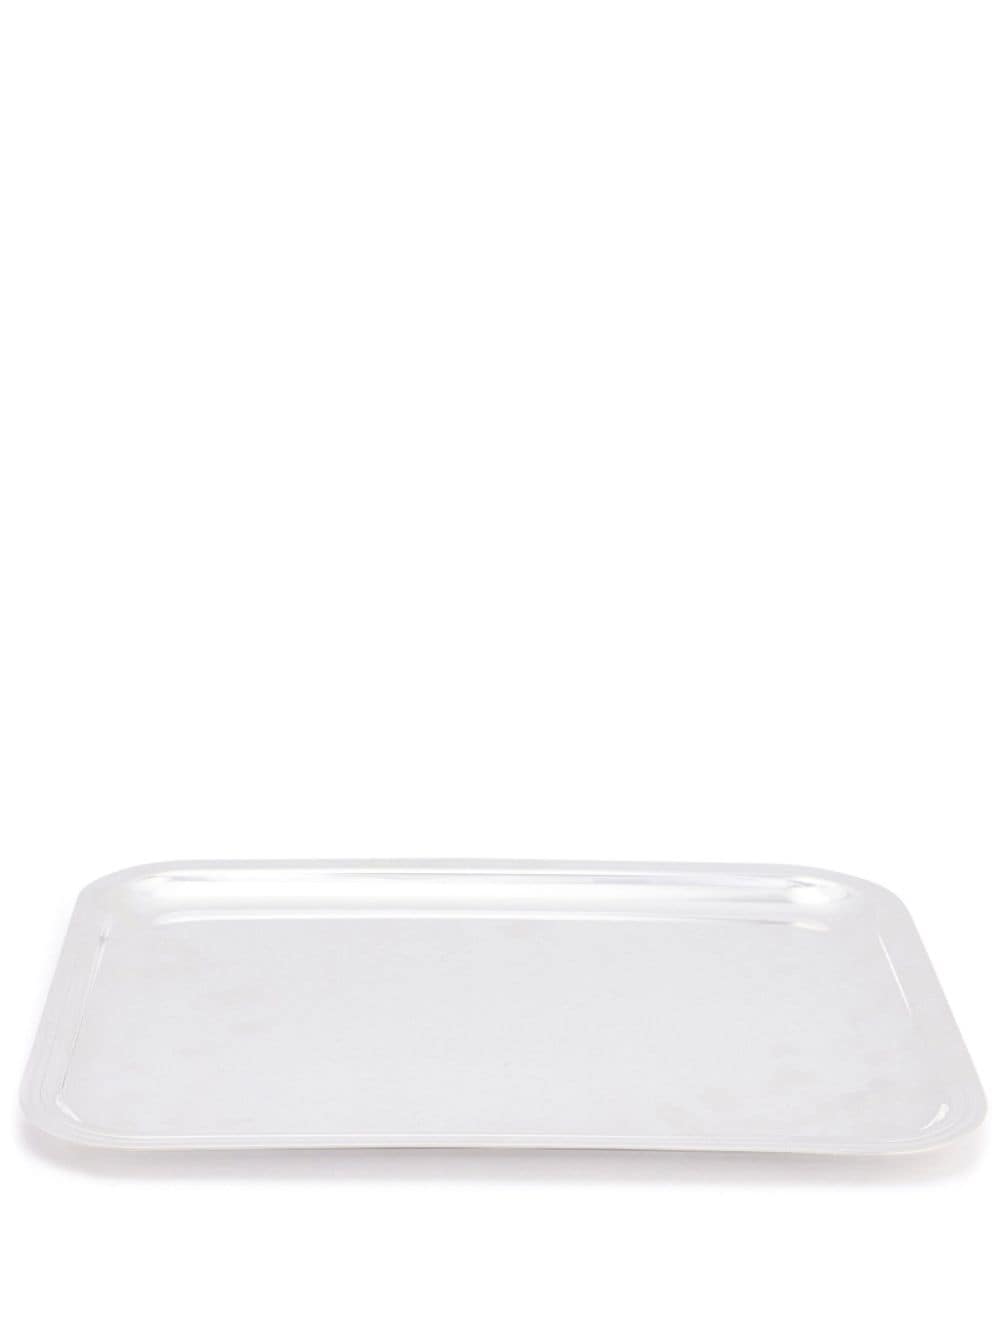 Christofle Albi Silver-plated Rectangular Tray In White